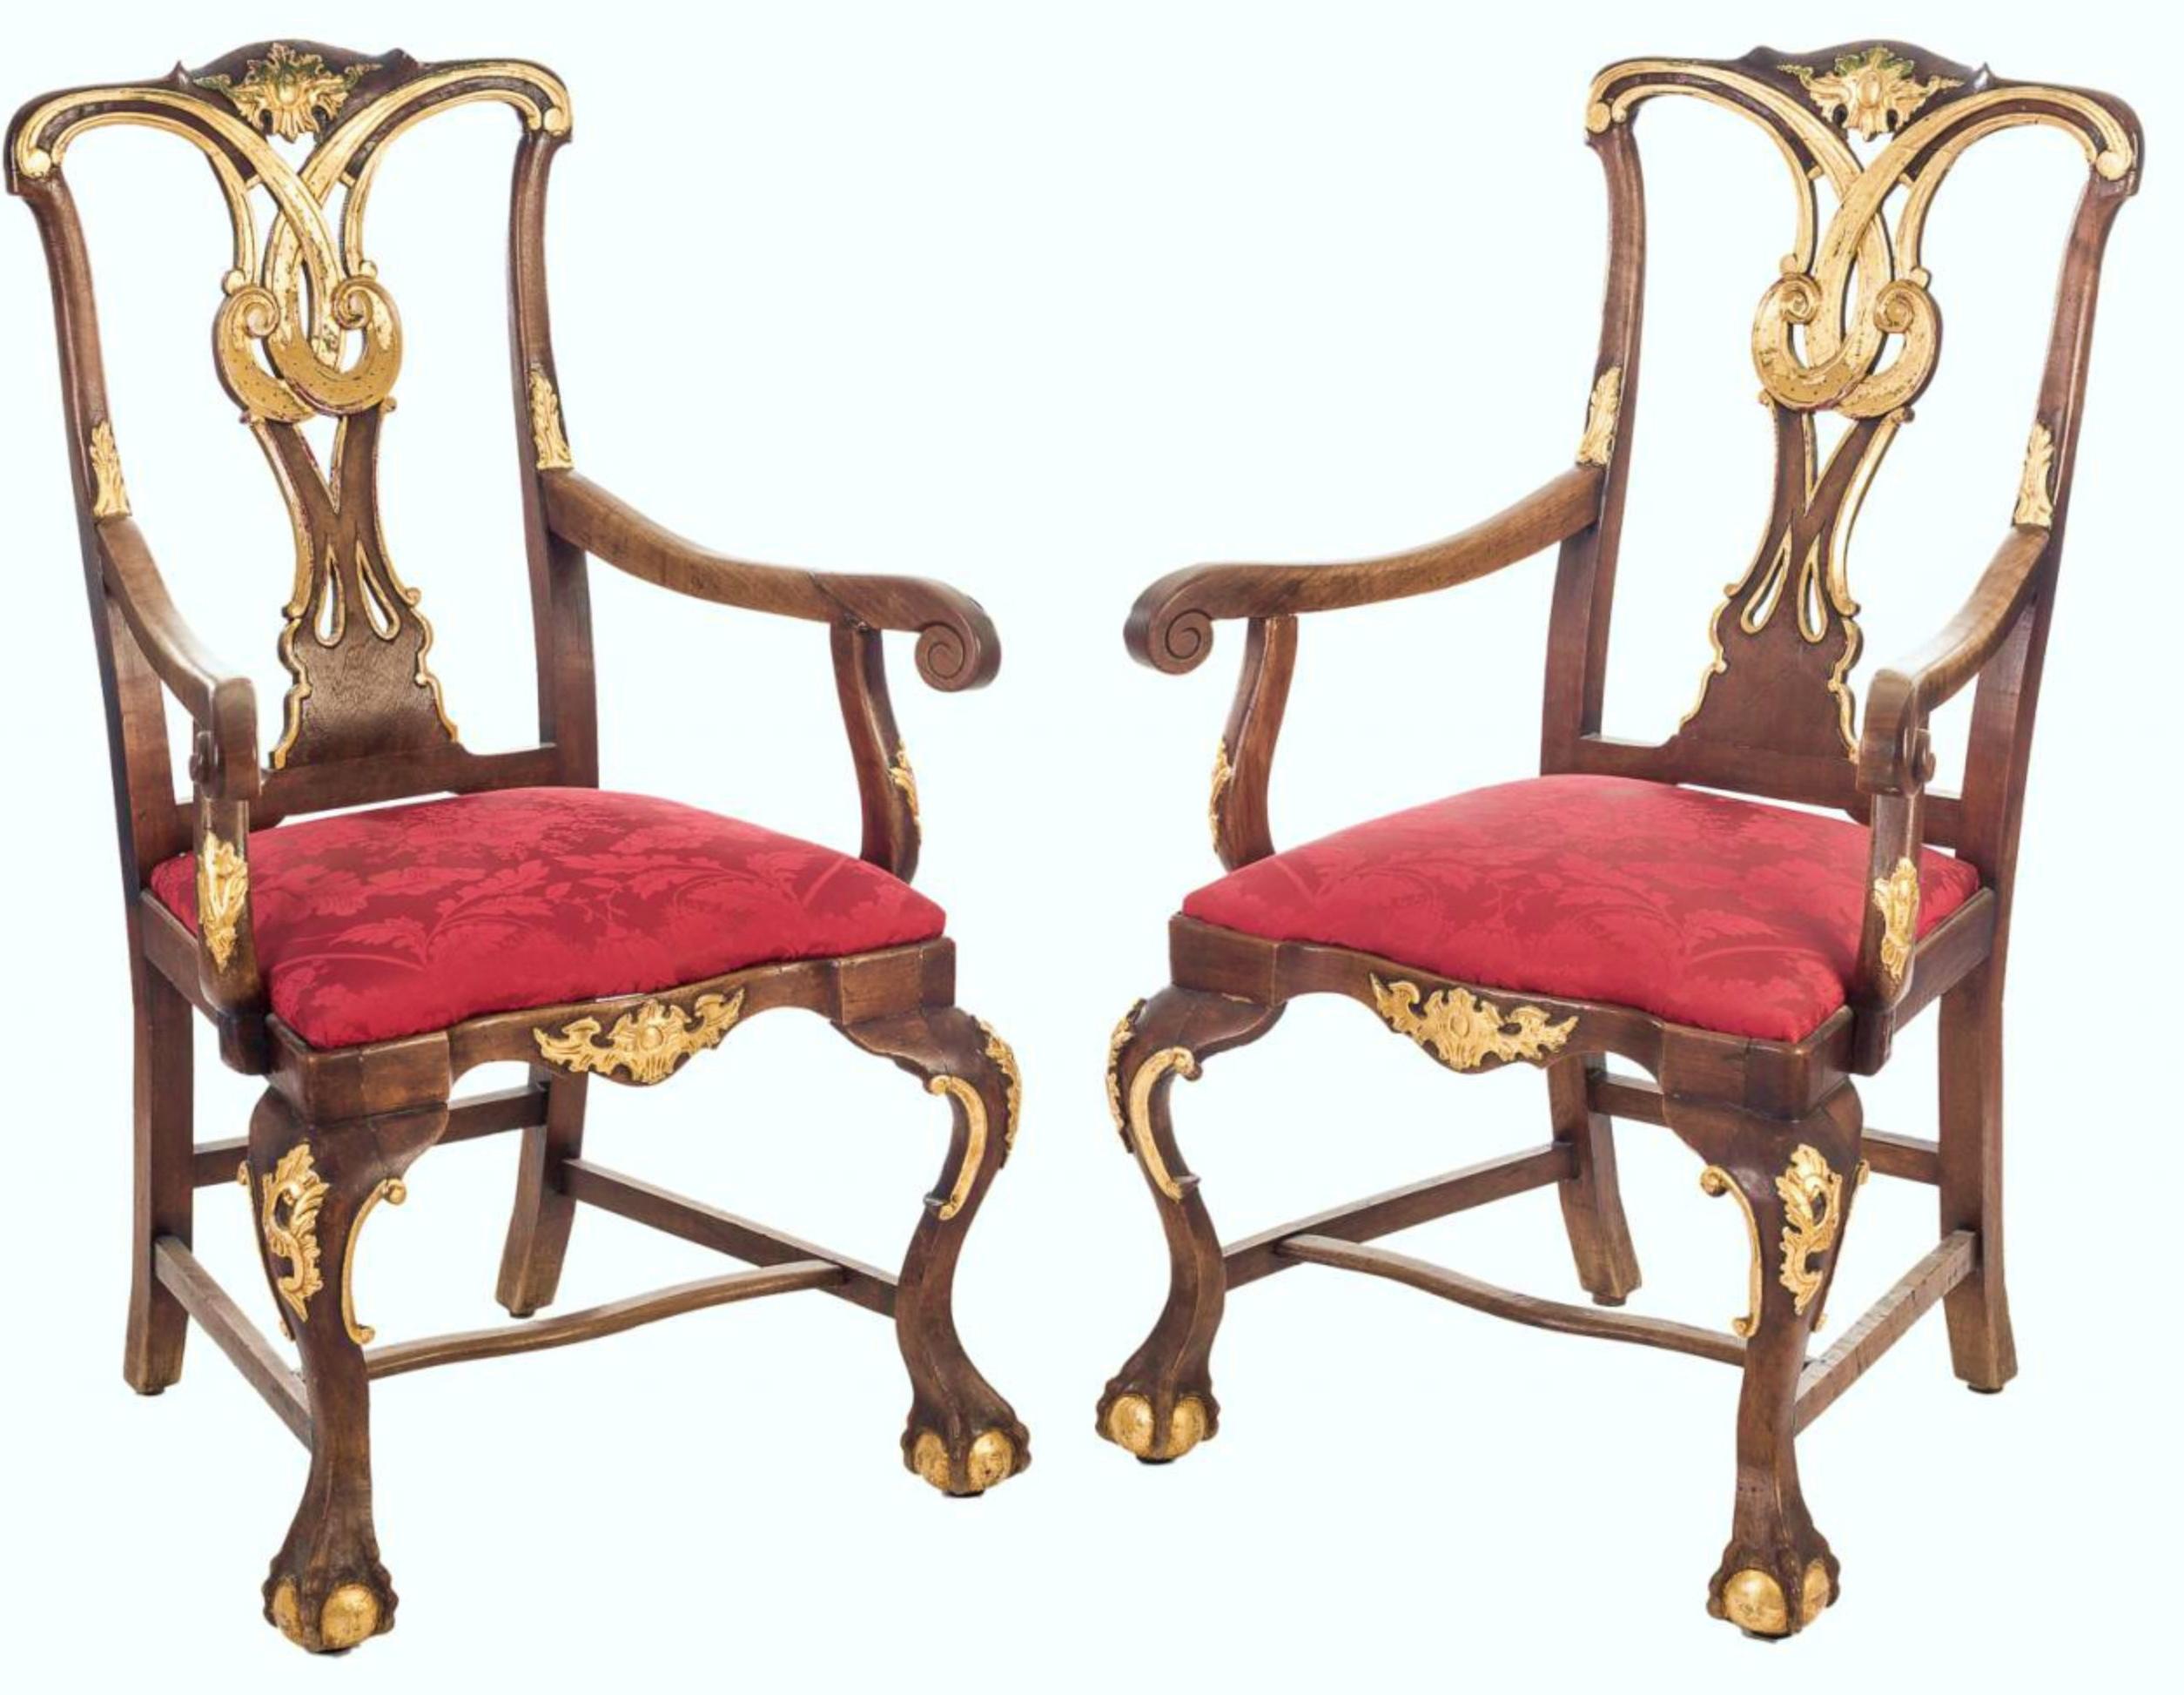 Rococo Chippendale Set, Sofa /2 Armchairs / 8 Chairs, 18th Century